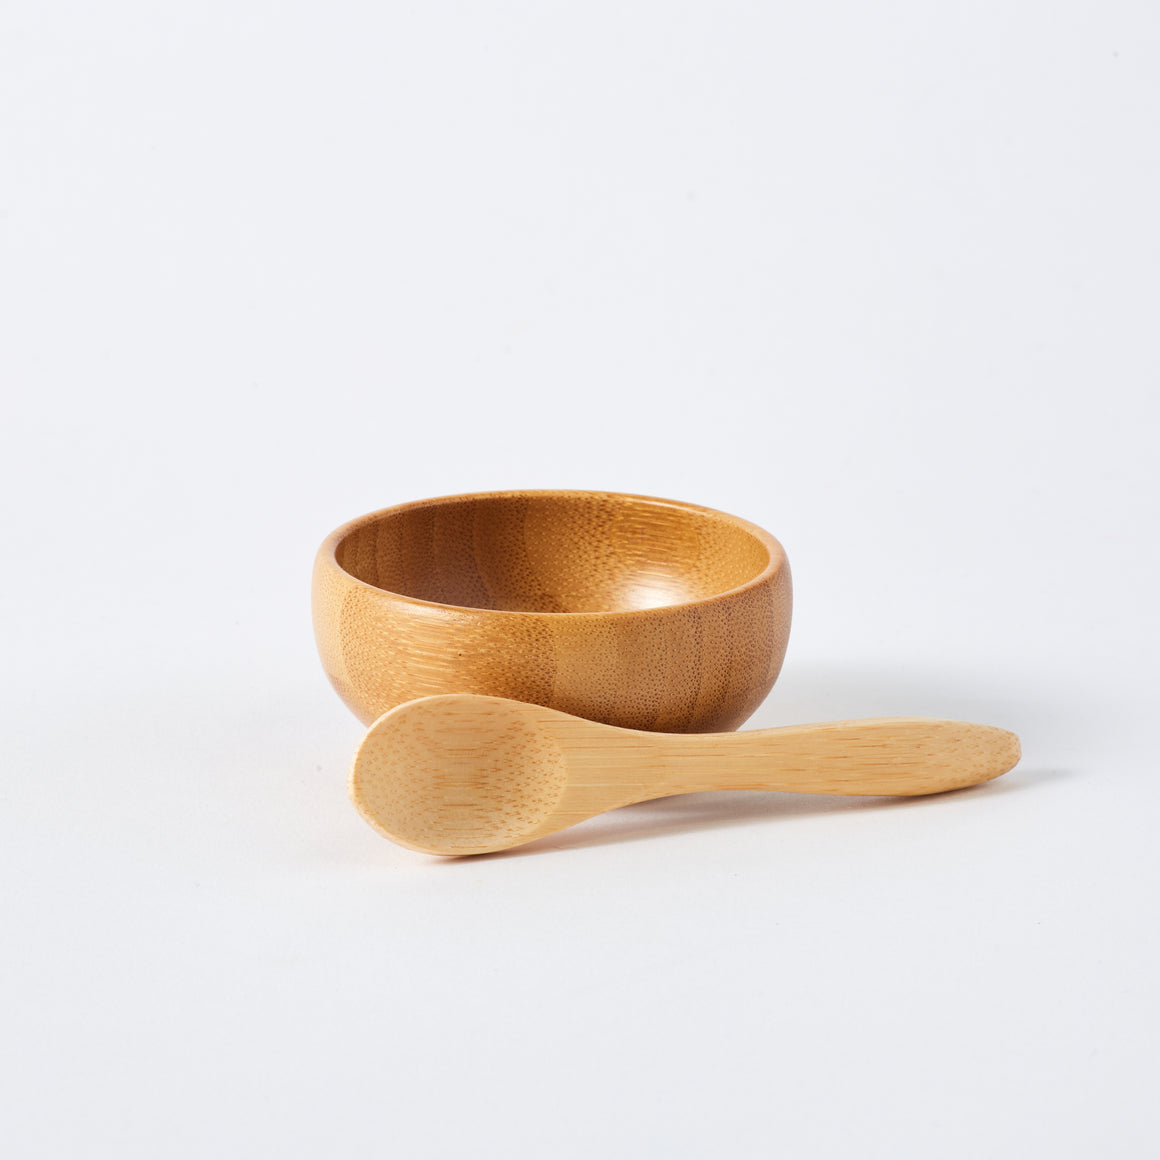 bamboo bowl & wooden spoon for face mask